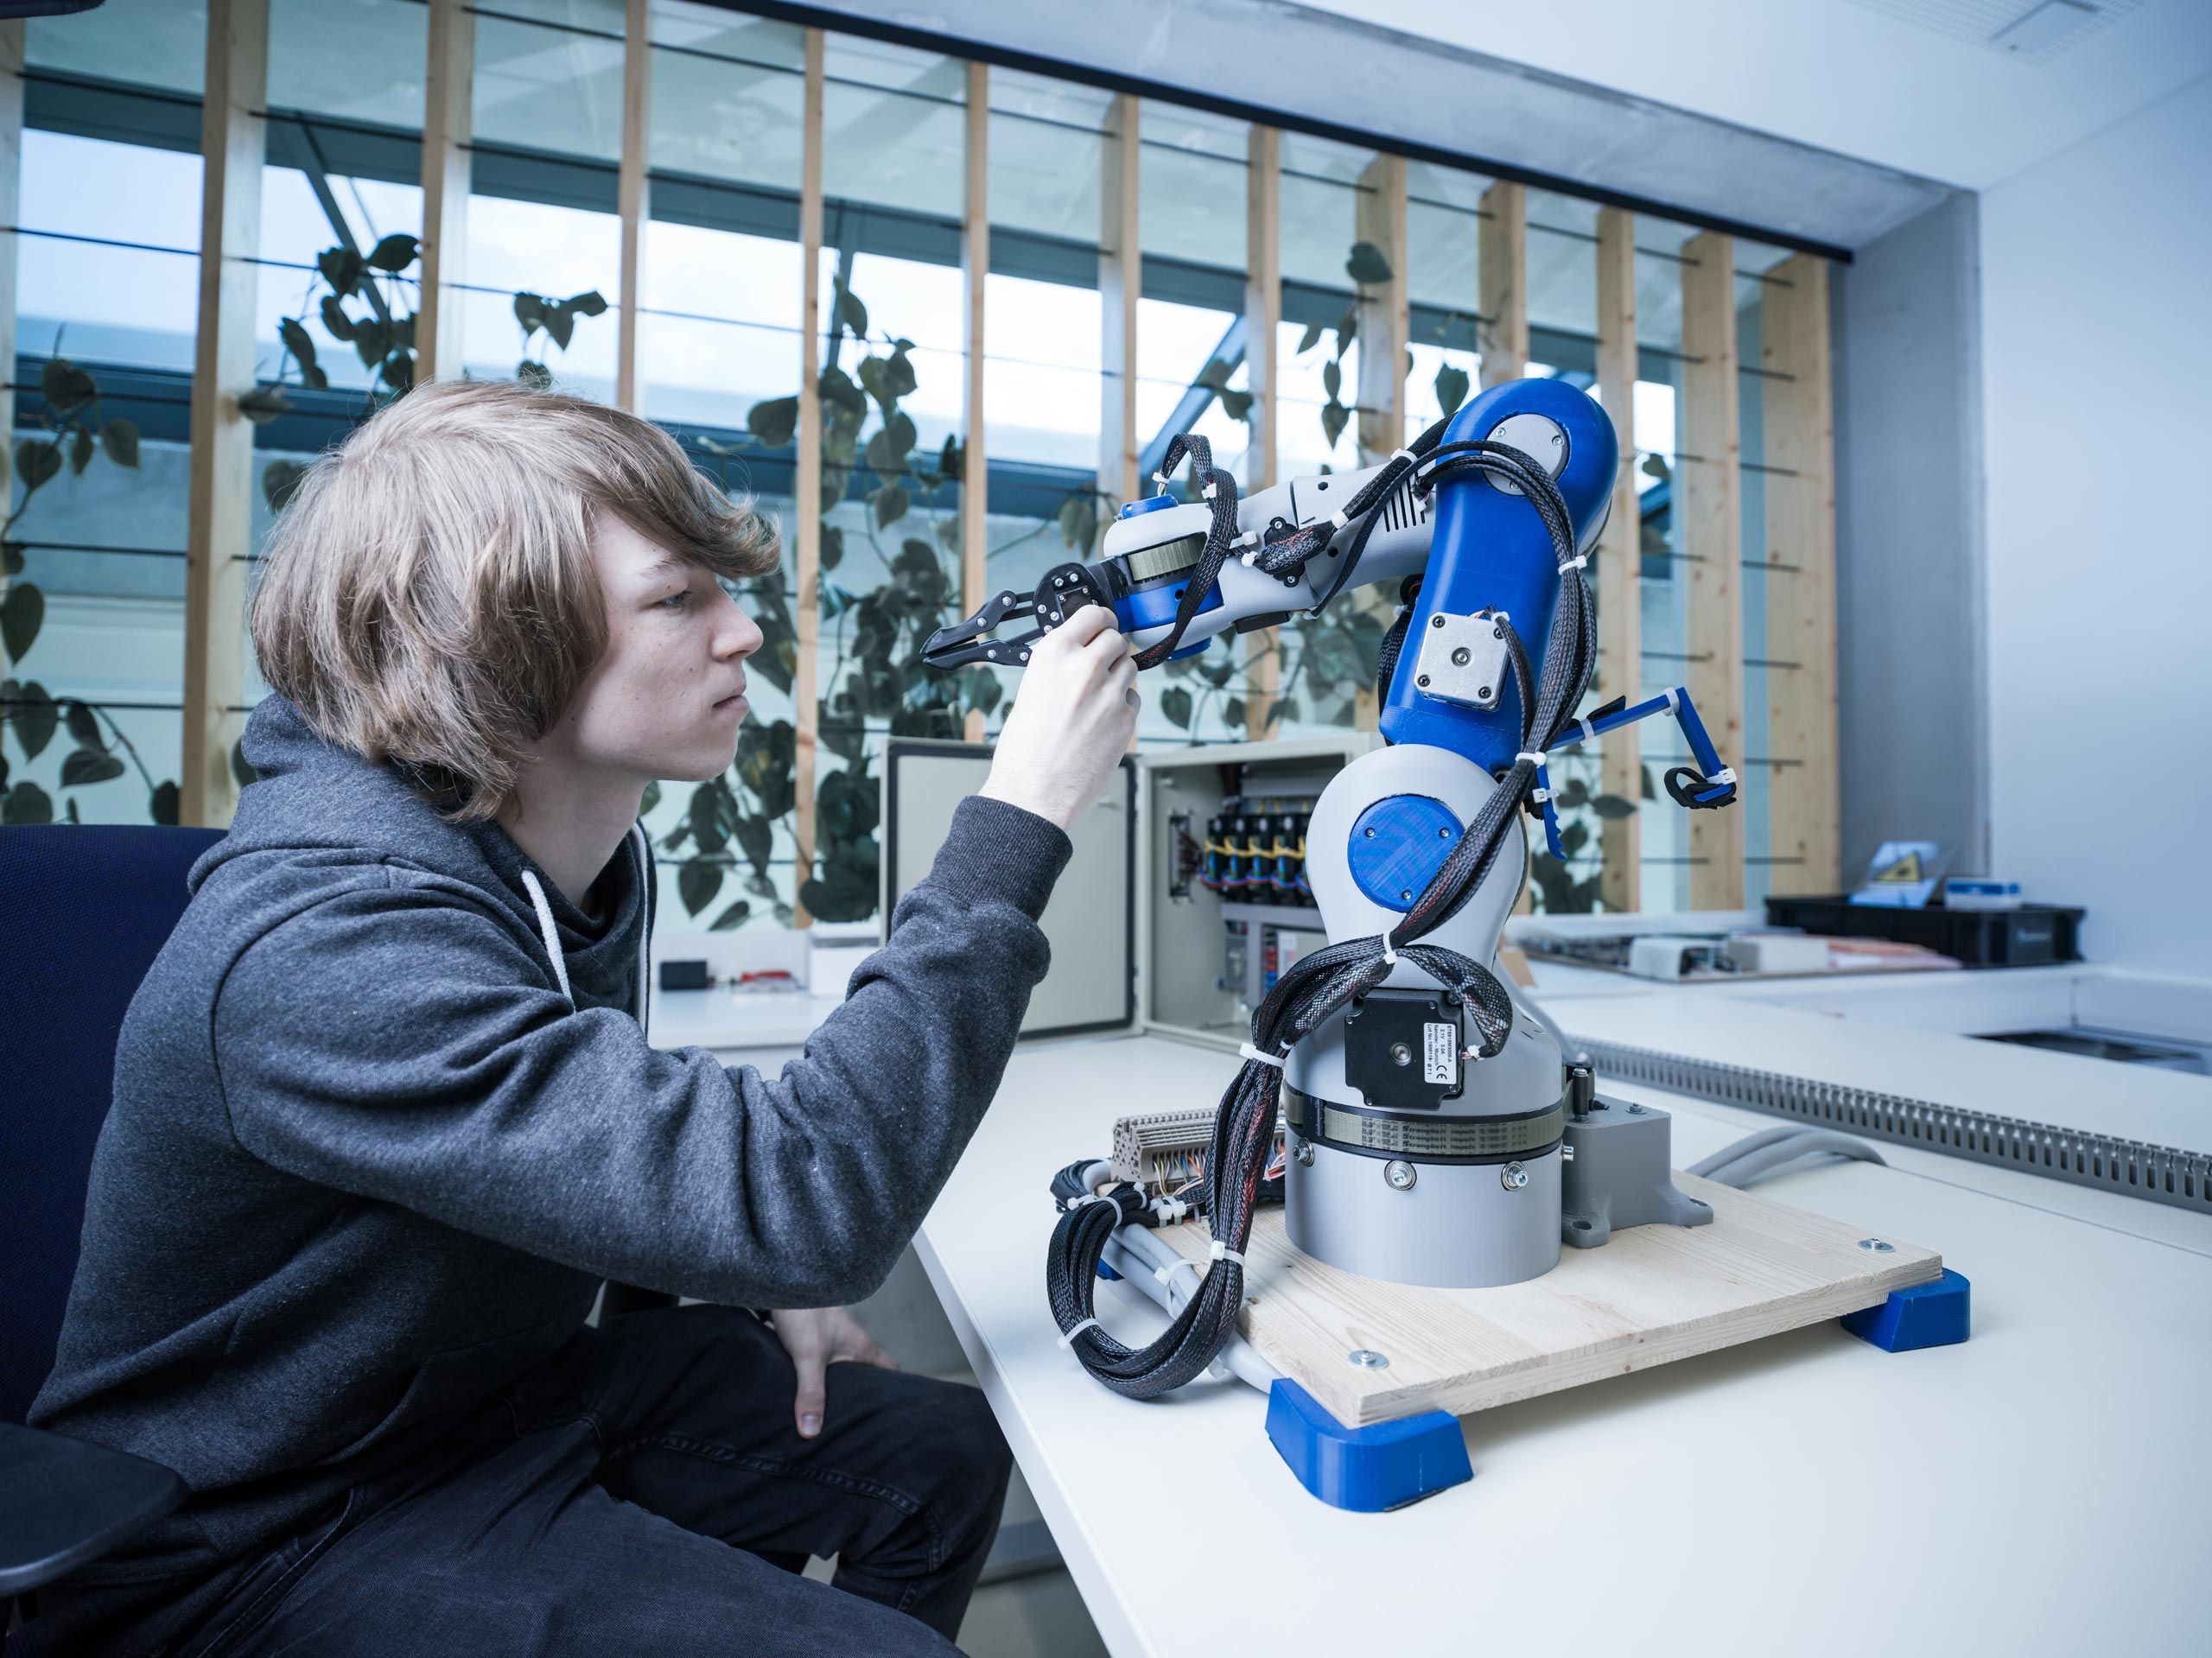 A young trainee works on a small robot